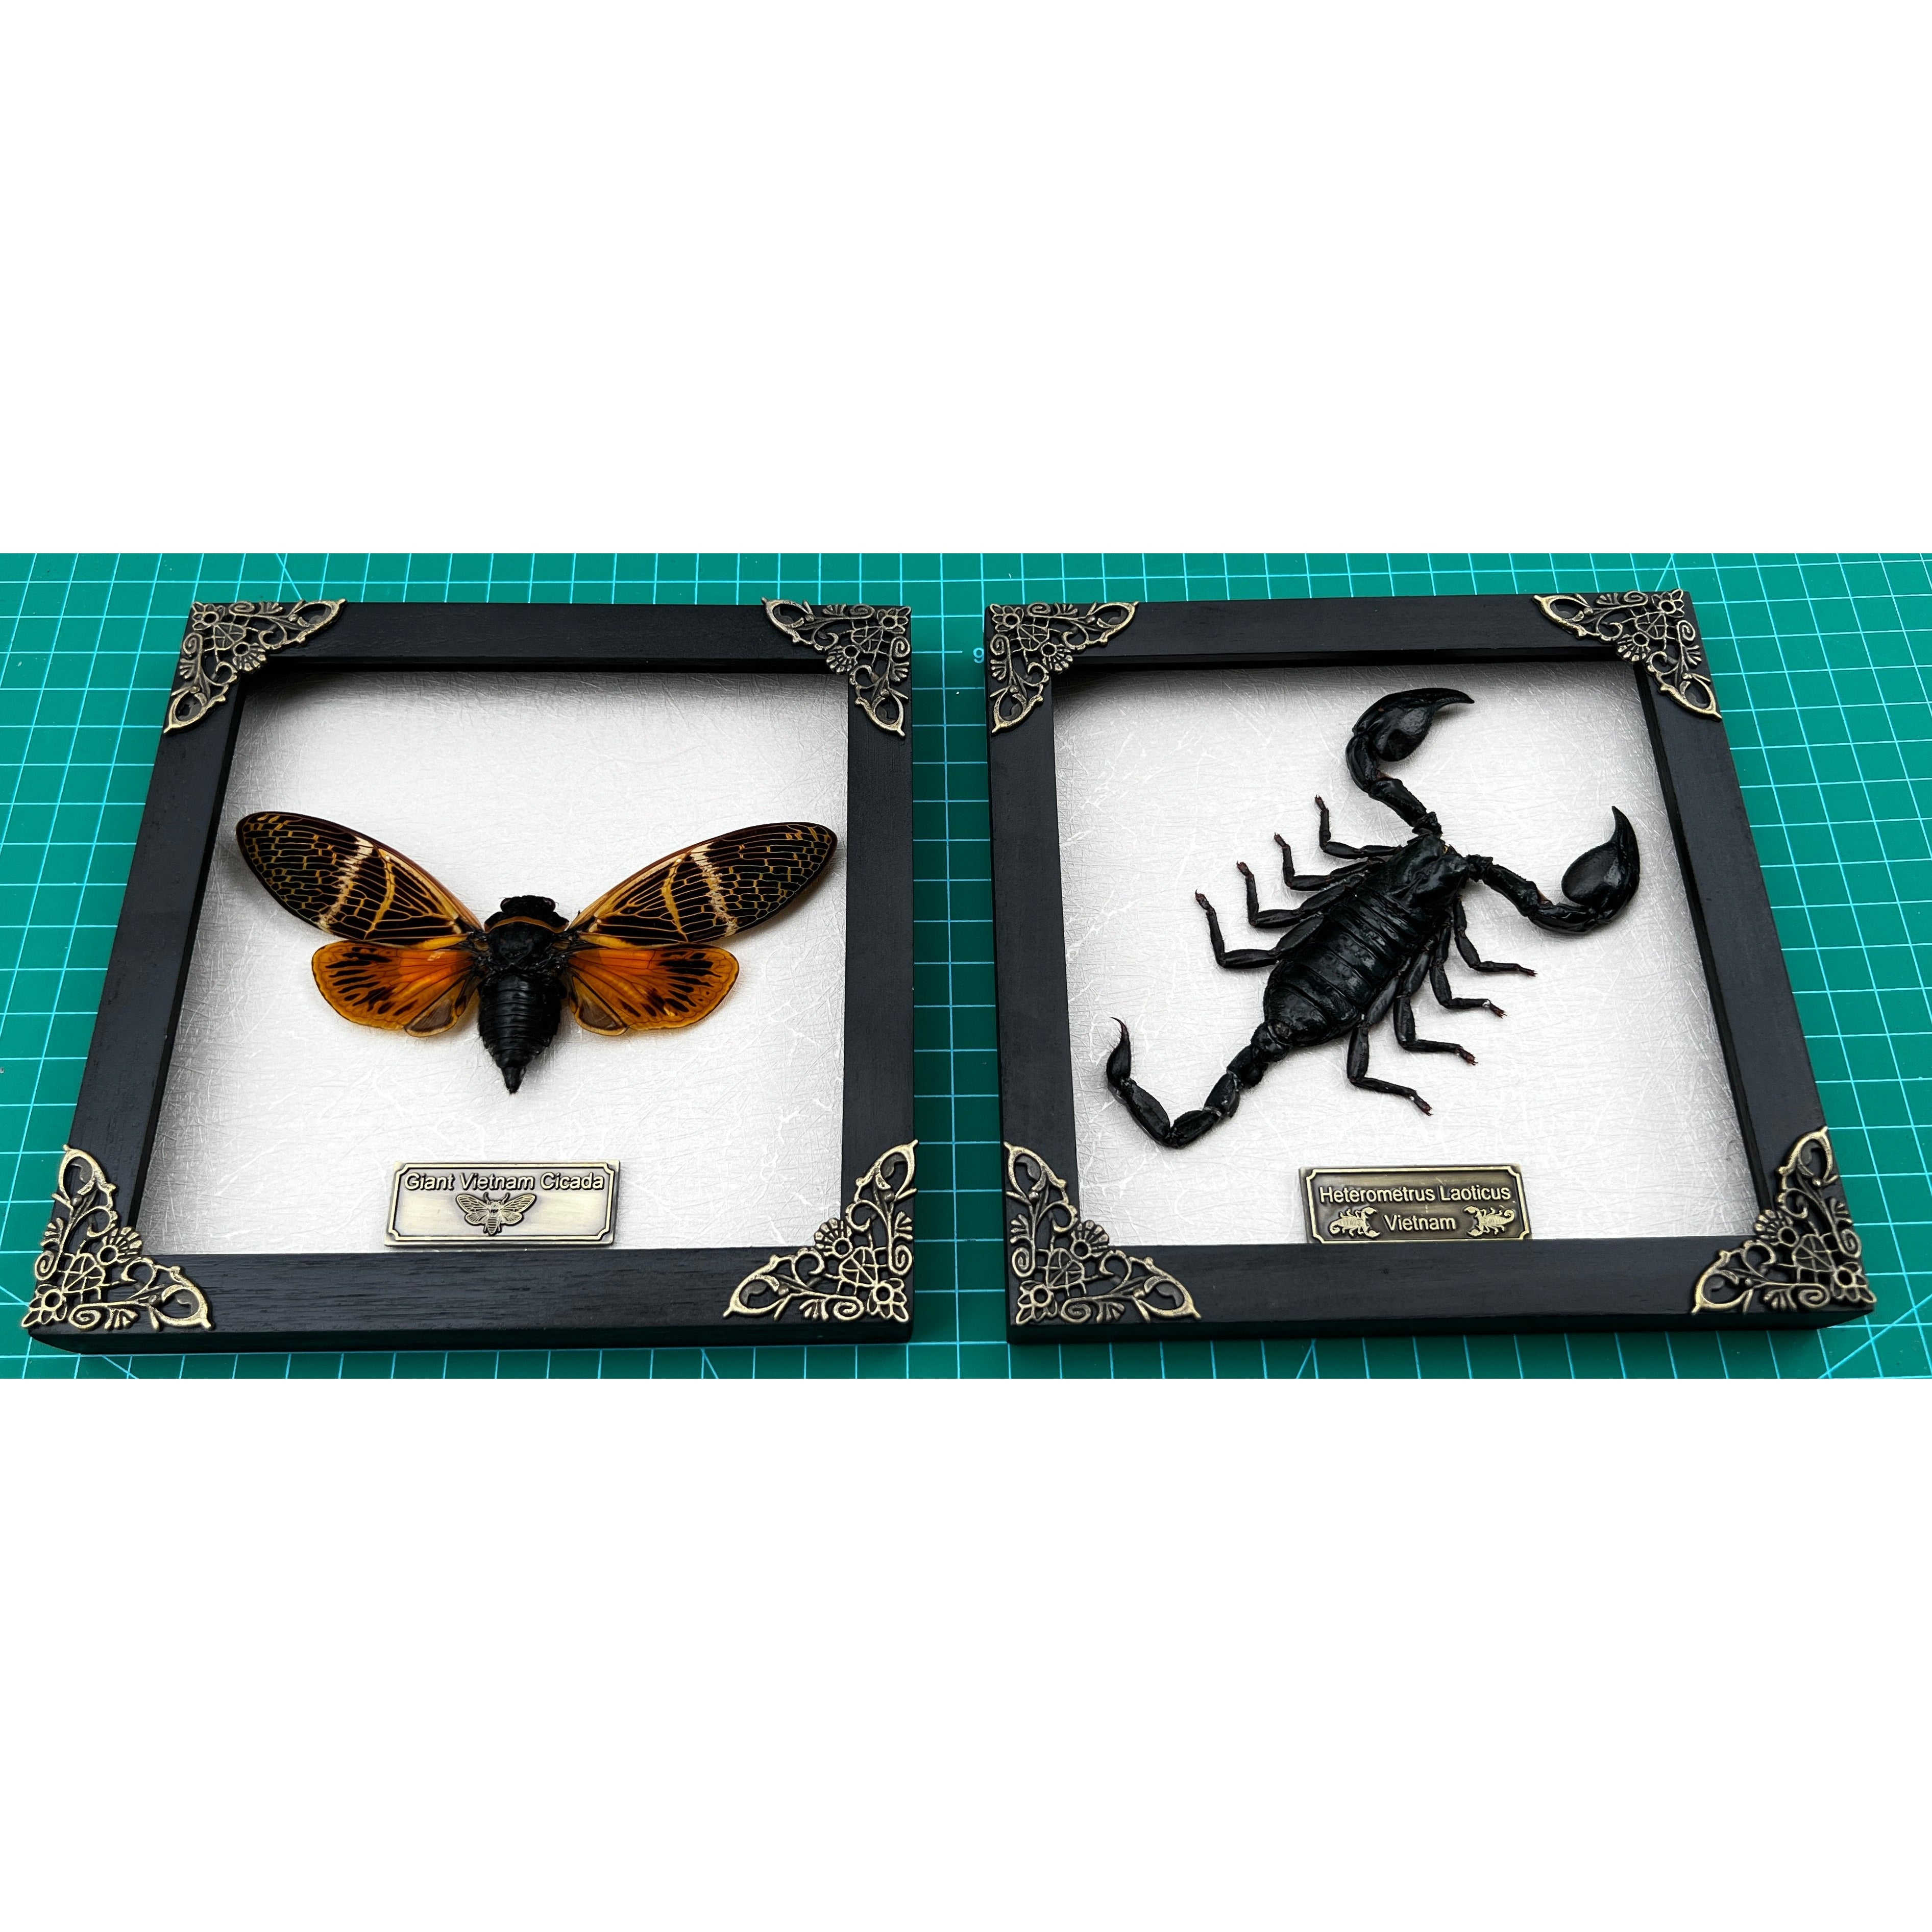 Pack of 2 Real Framed Scorpion Cicada Beetle Shadow Box Insect Unique Taxidermy Collectables Tabletop Wall Art Home Decor Living Gallery K16-50TR51TR - Vinacreations